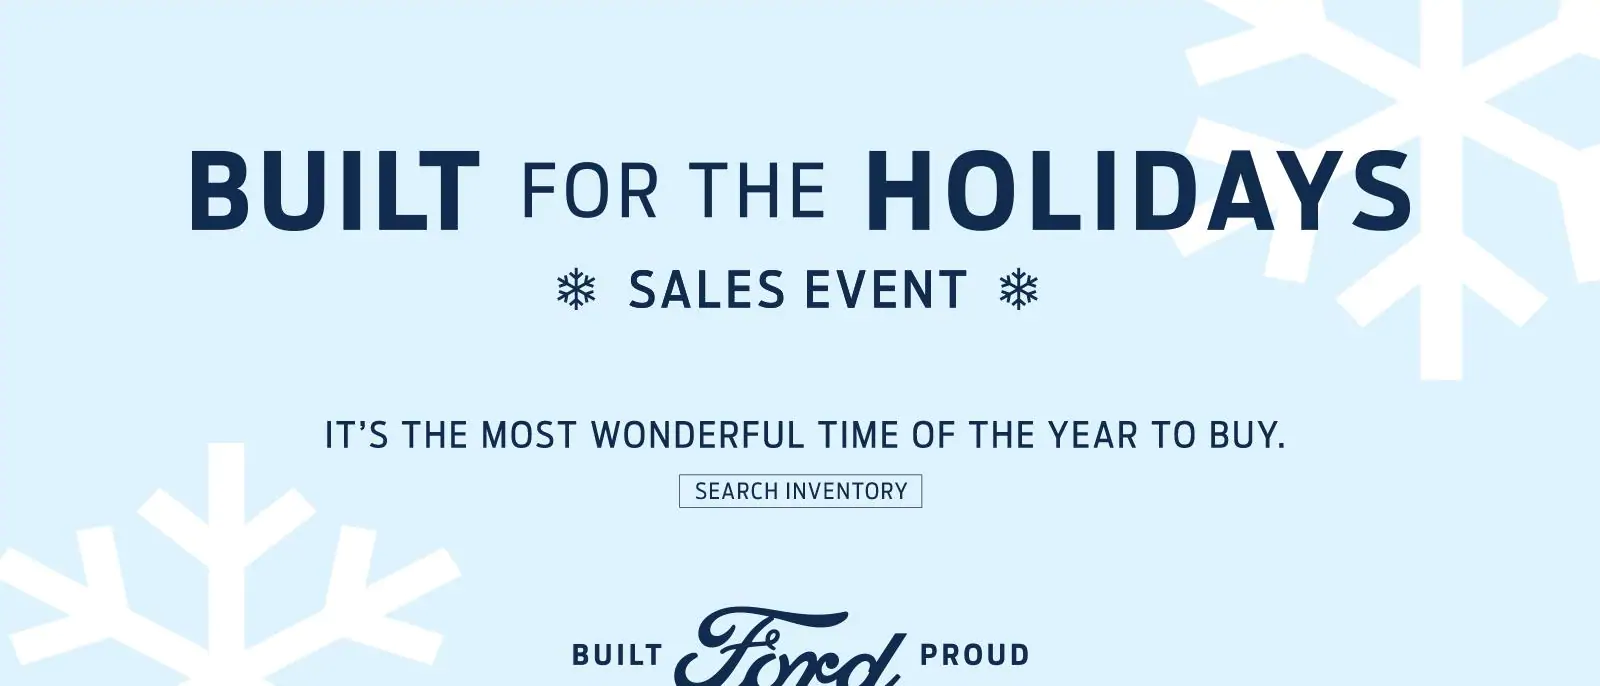 Image of 2018 Ford Built for the Holidays banner.